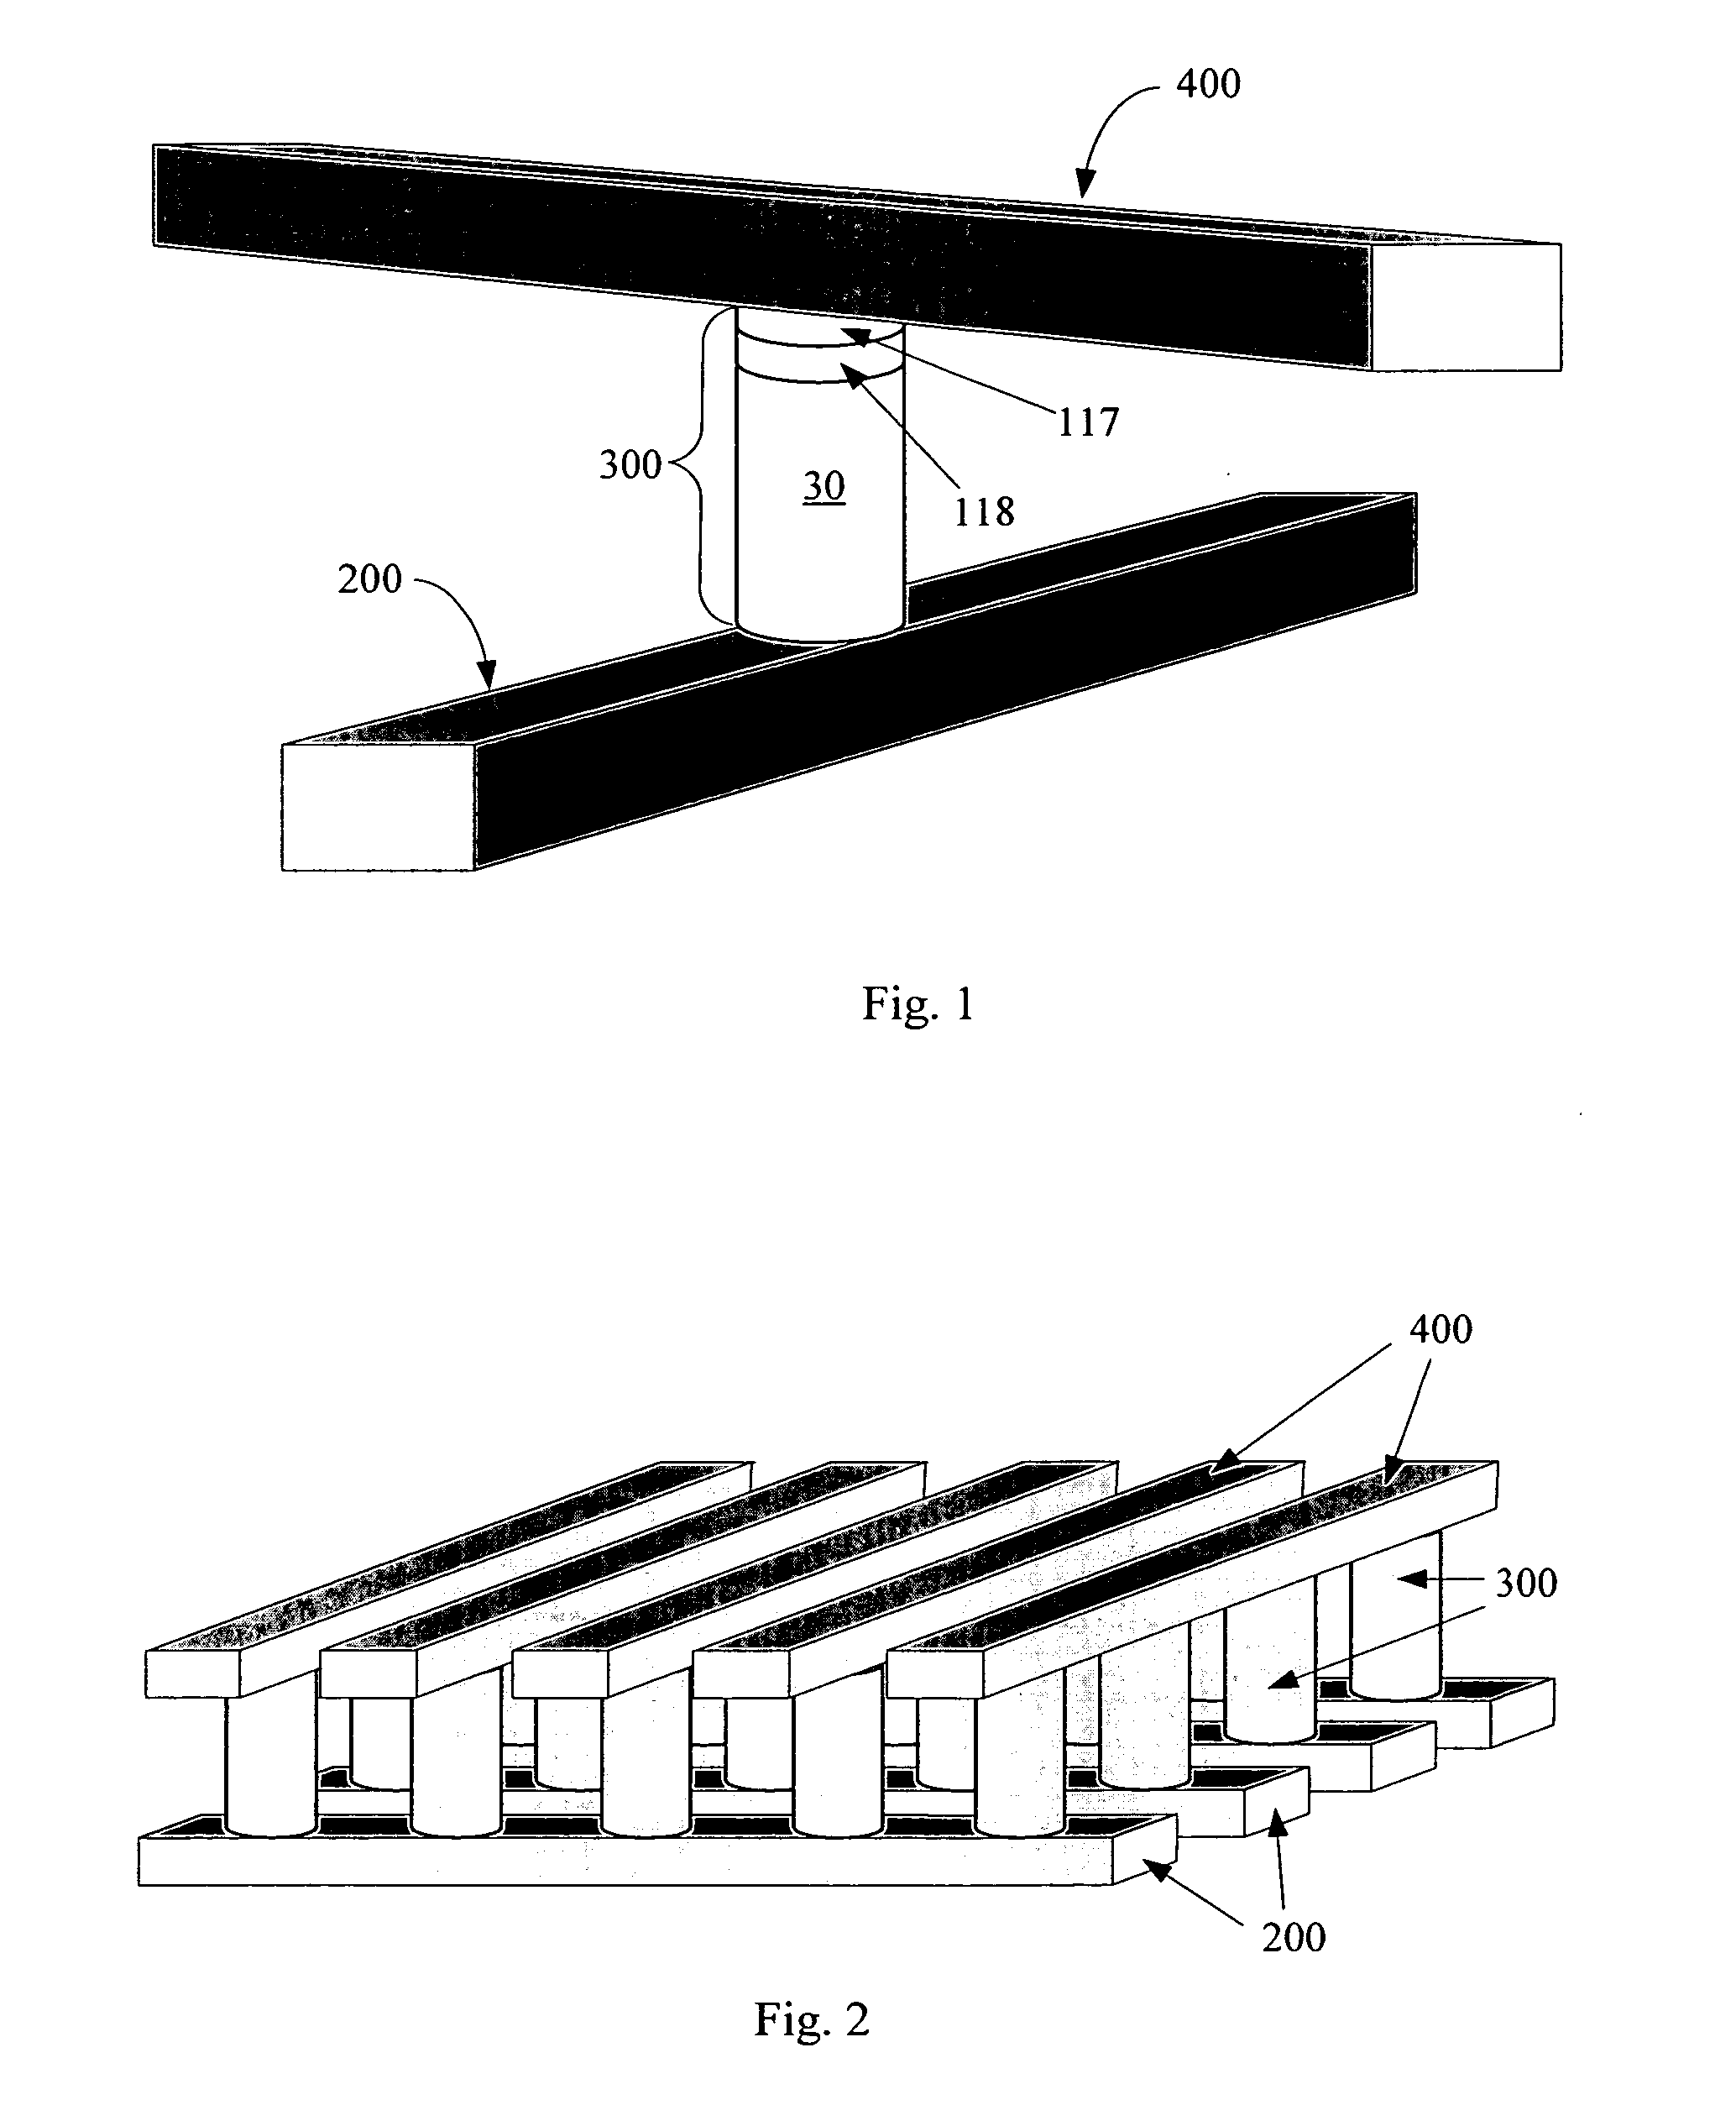 Nonvolatile rewritable memory cell comprising a resistivity-switching oxide or nitride and an antifuse